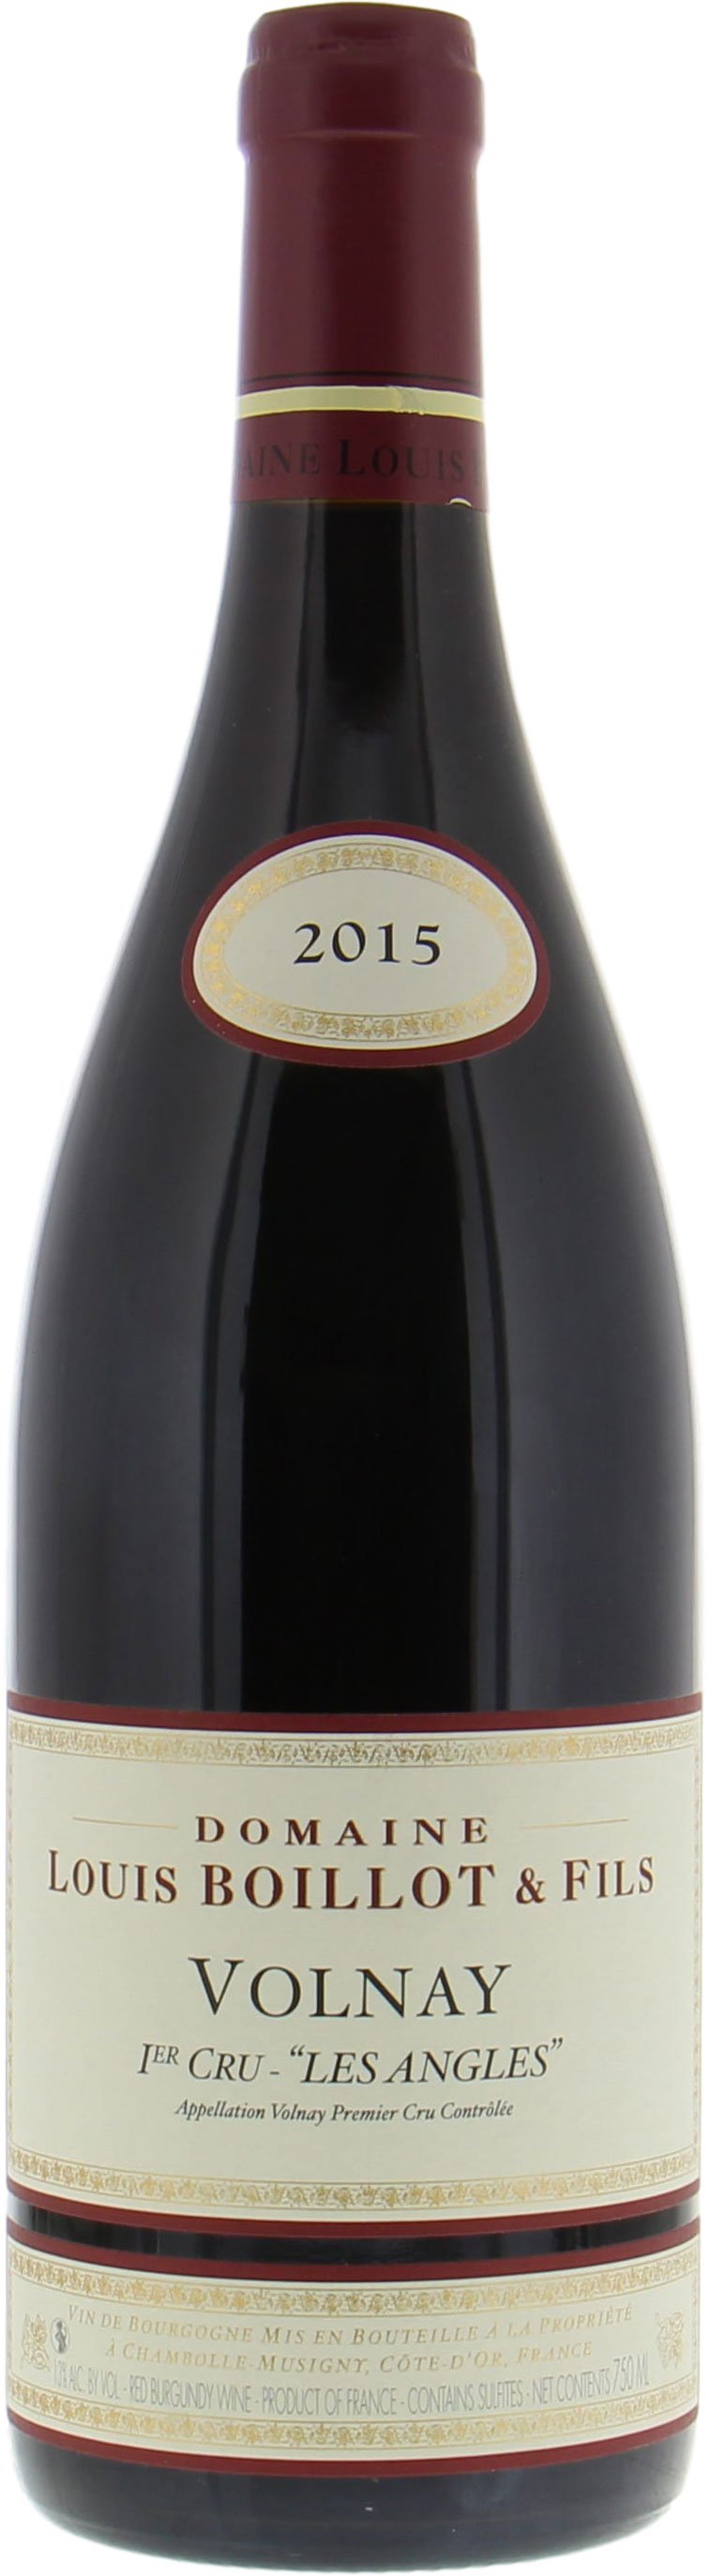 Domaine Louis Boillot - Volnay 1Er Cru les Angles 2015 Perfect